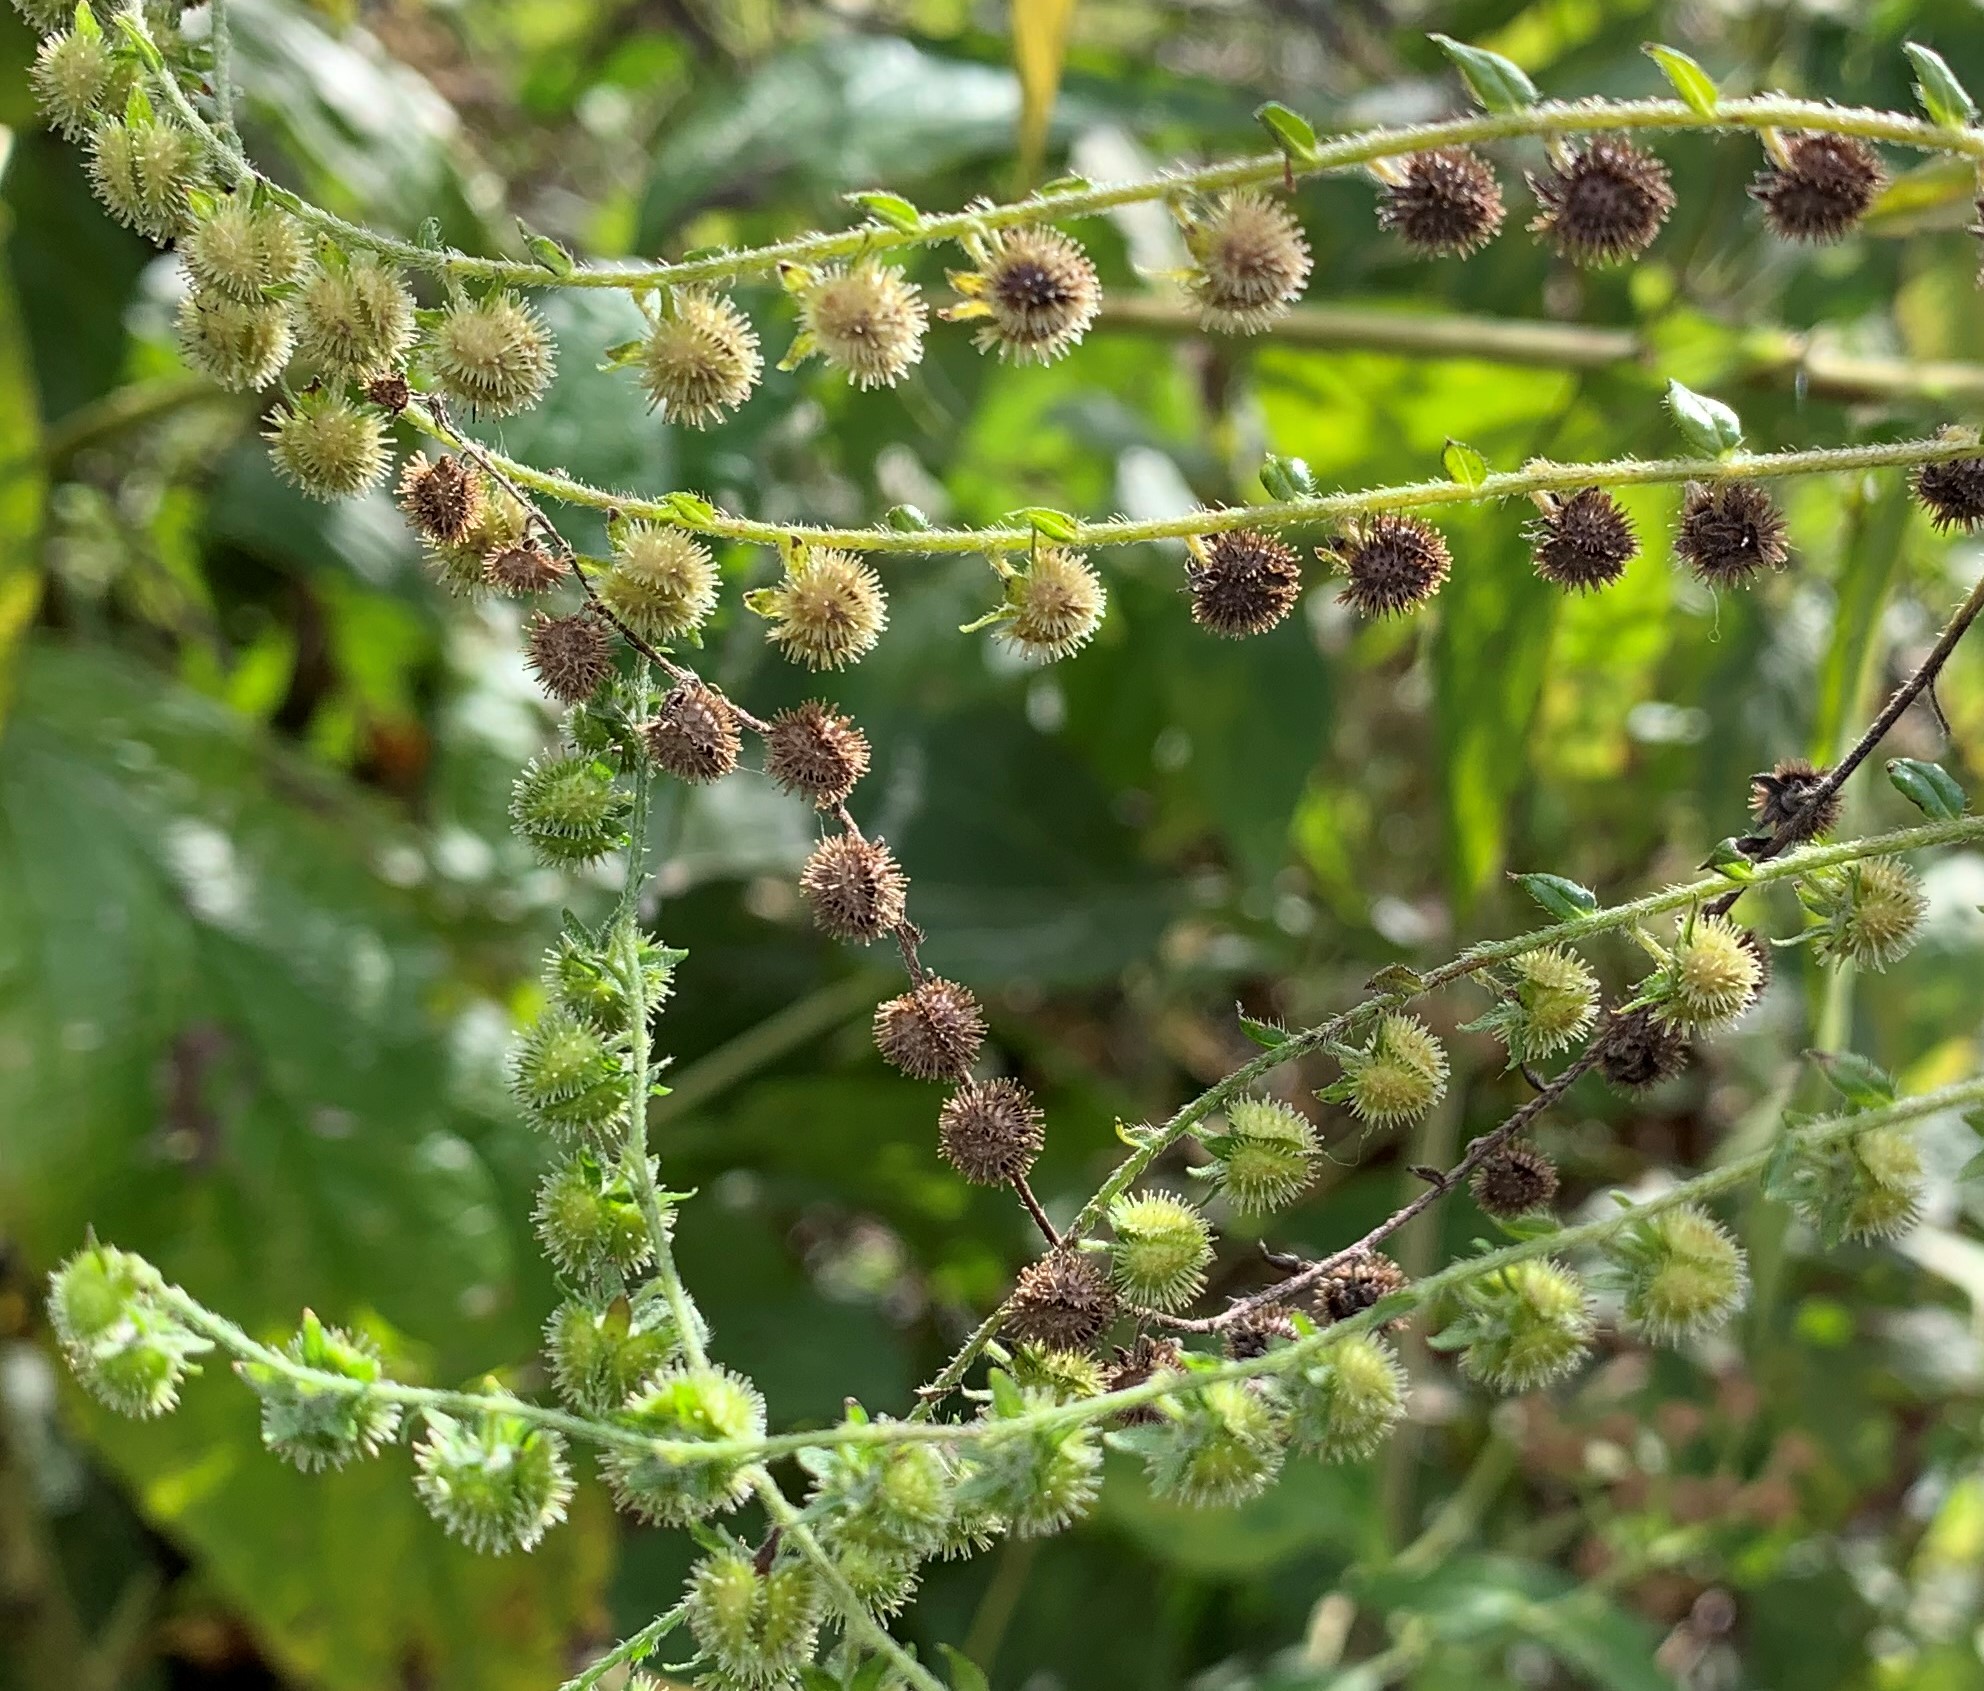 dozens of green and brown, ball-shape burrs, ranged along underside of horizontal stems atop a lanky, slender plant. Virginia stickseed, AKA beggar lice, ripening in the late summer sun.